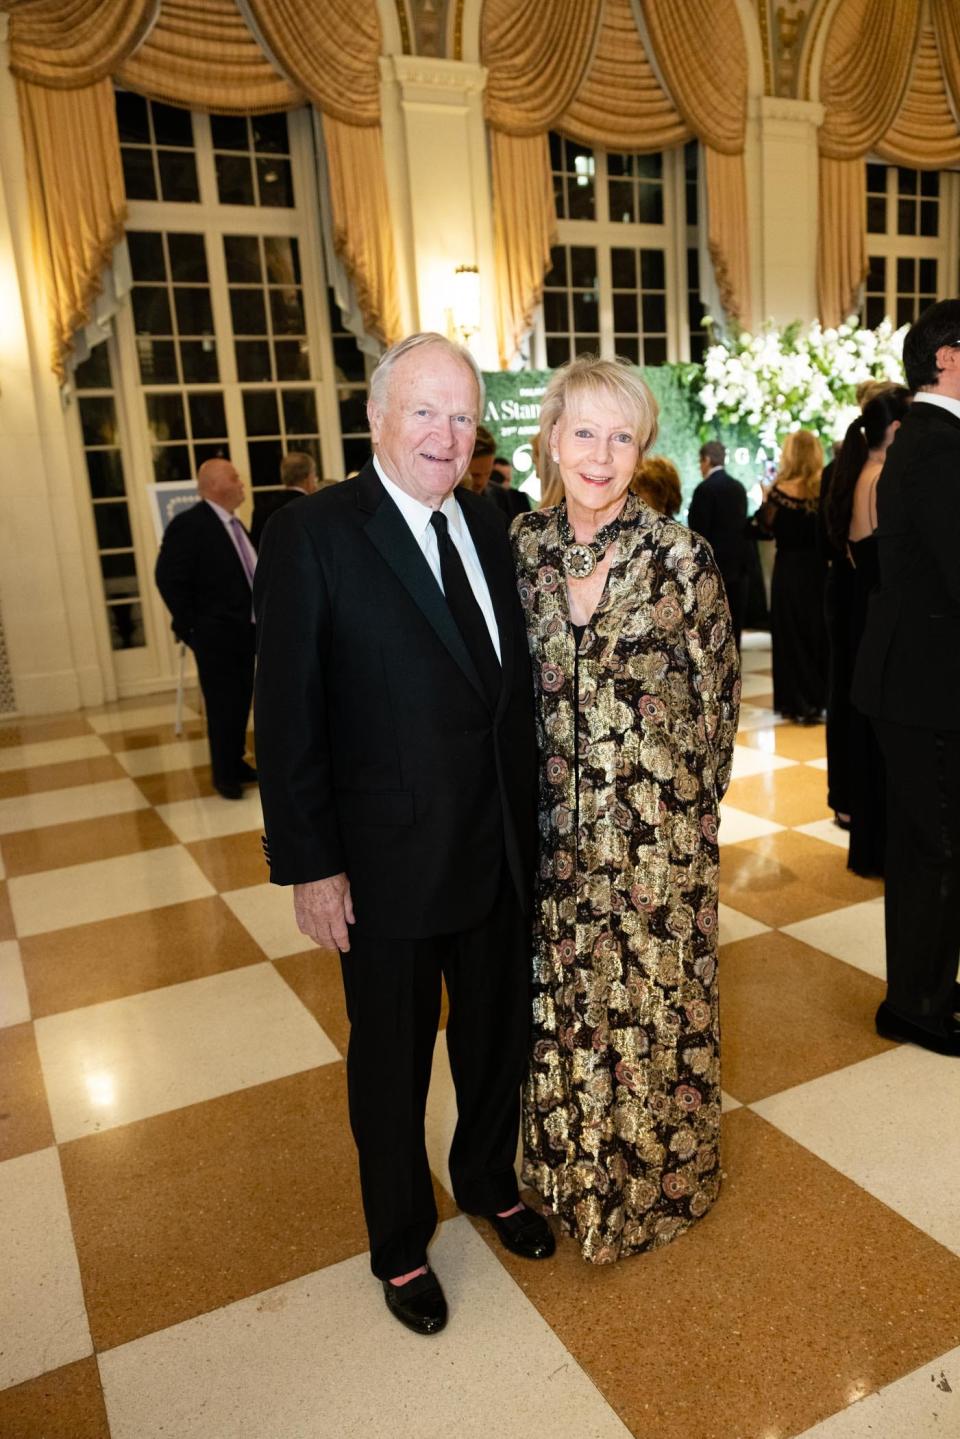 Tom Harvey and Cathie Black at the Palm Beach Symphony gala on Feb. 20 at The Breakers.